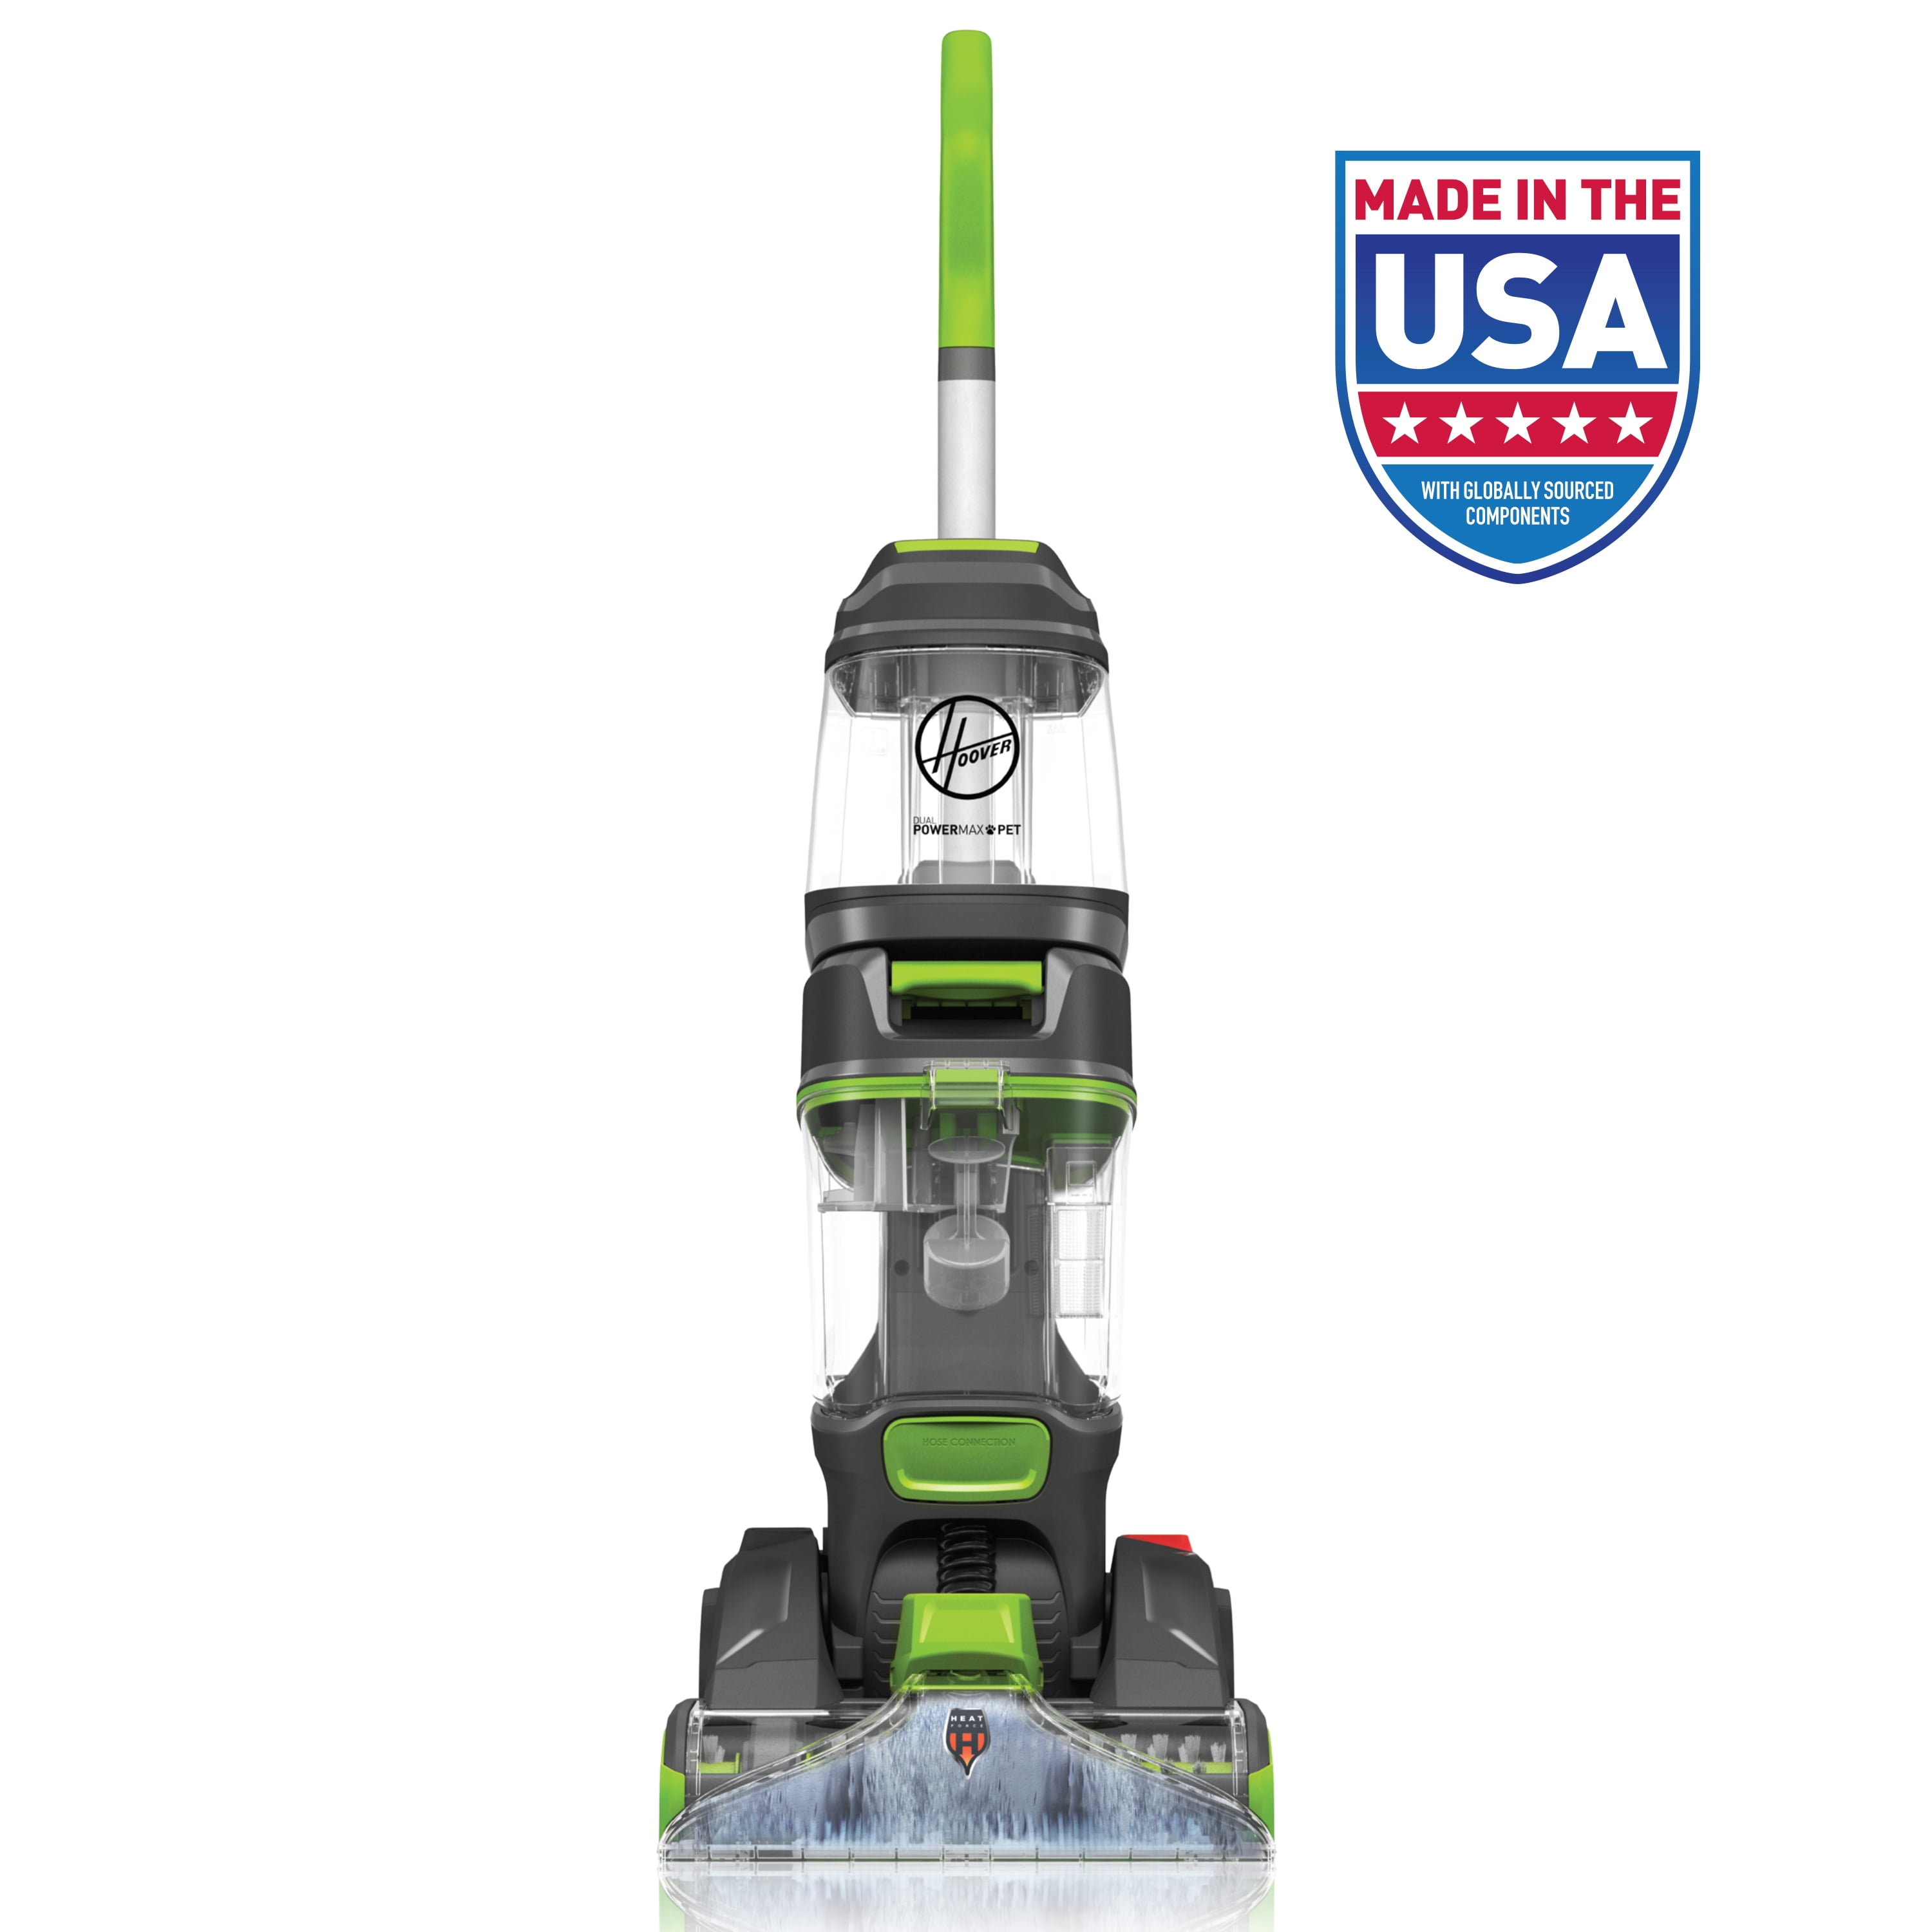 Hoover FH54011 Dual Power Max Pet Upright Carpet Vacuum Cleaner Machine with Dual Spin Power Brushes